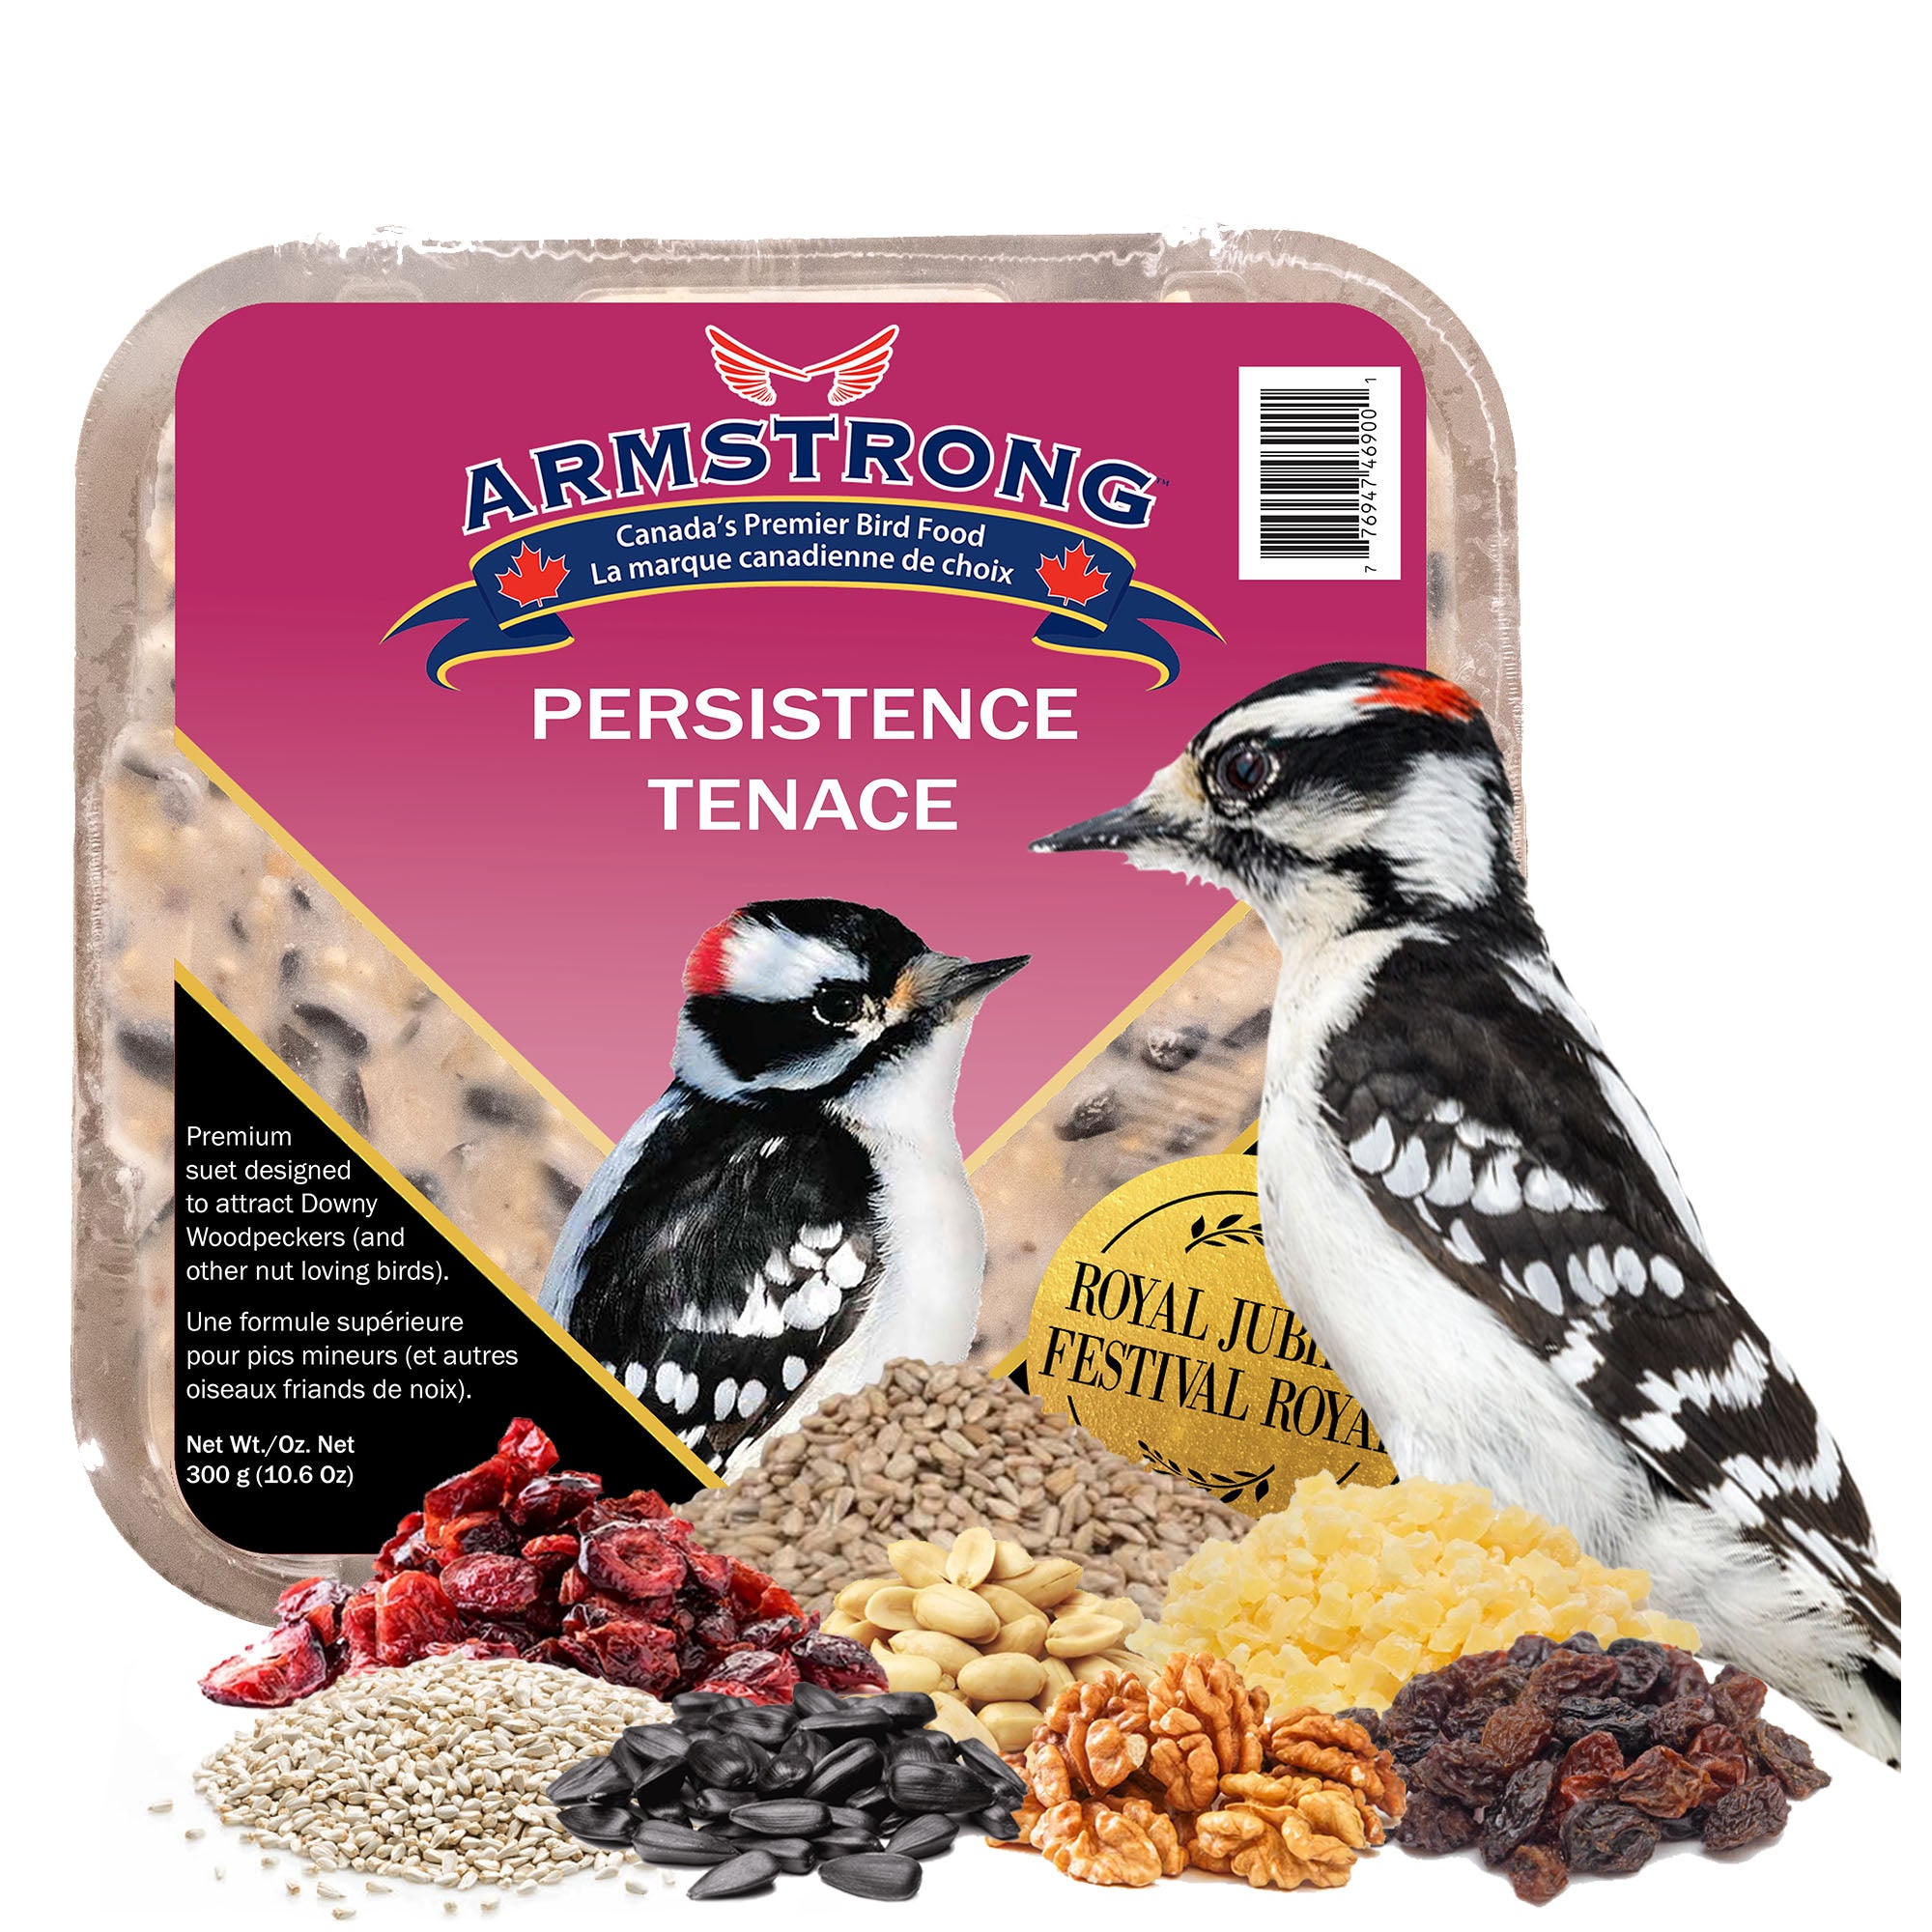 Armstrong Wild Bird Food Royal Jubilee Persistence Suet Blend for Woodpeckers, 10.6oz (Pack of 3)